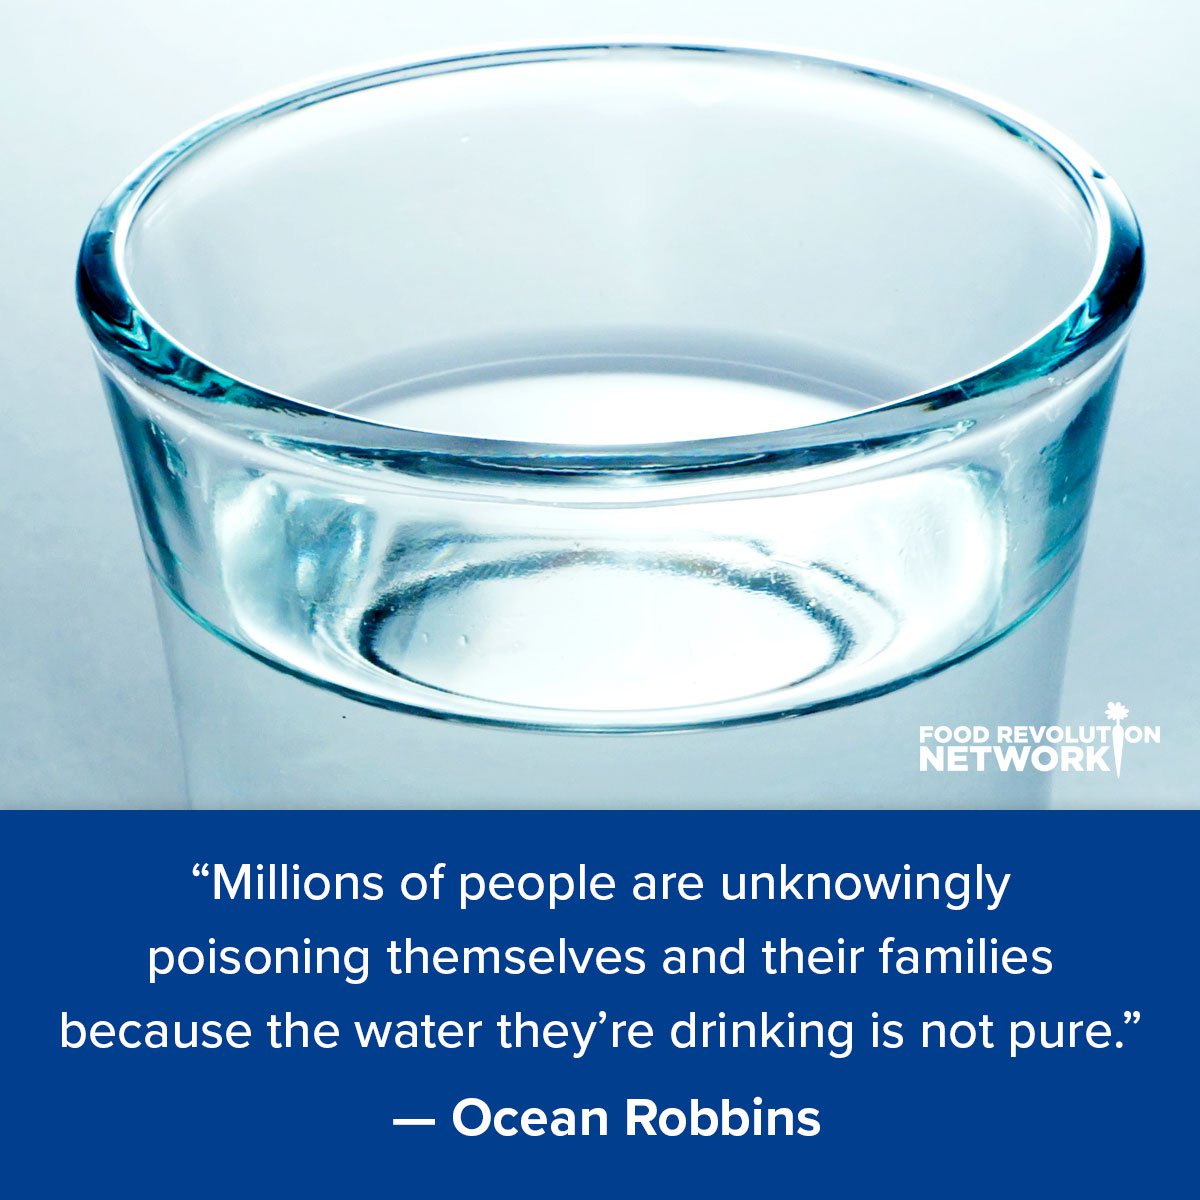 "Millions of people are unknowingly poisoning themselves and their families because the water they’re drinking is not pure." — Ocean Robbins